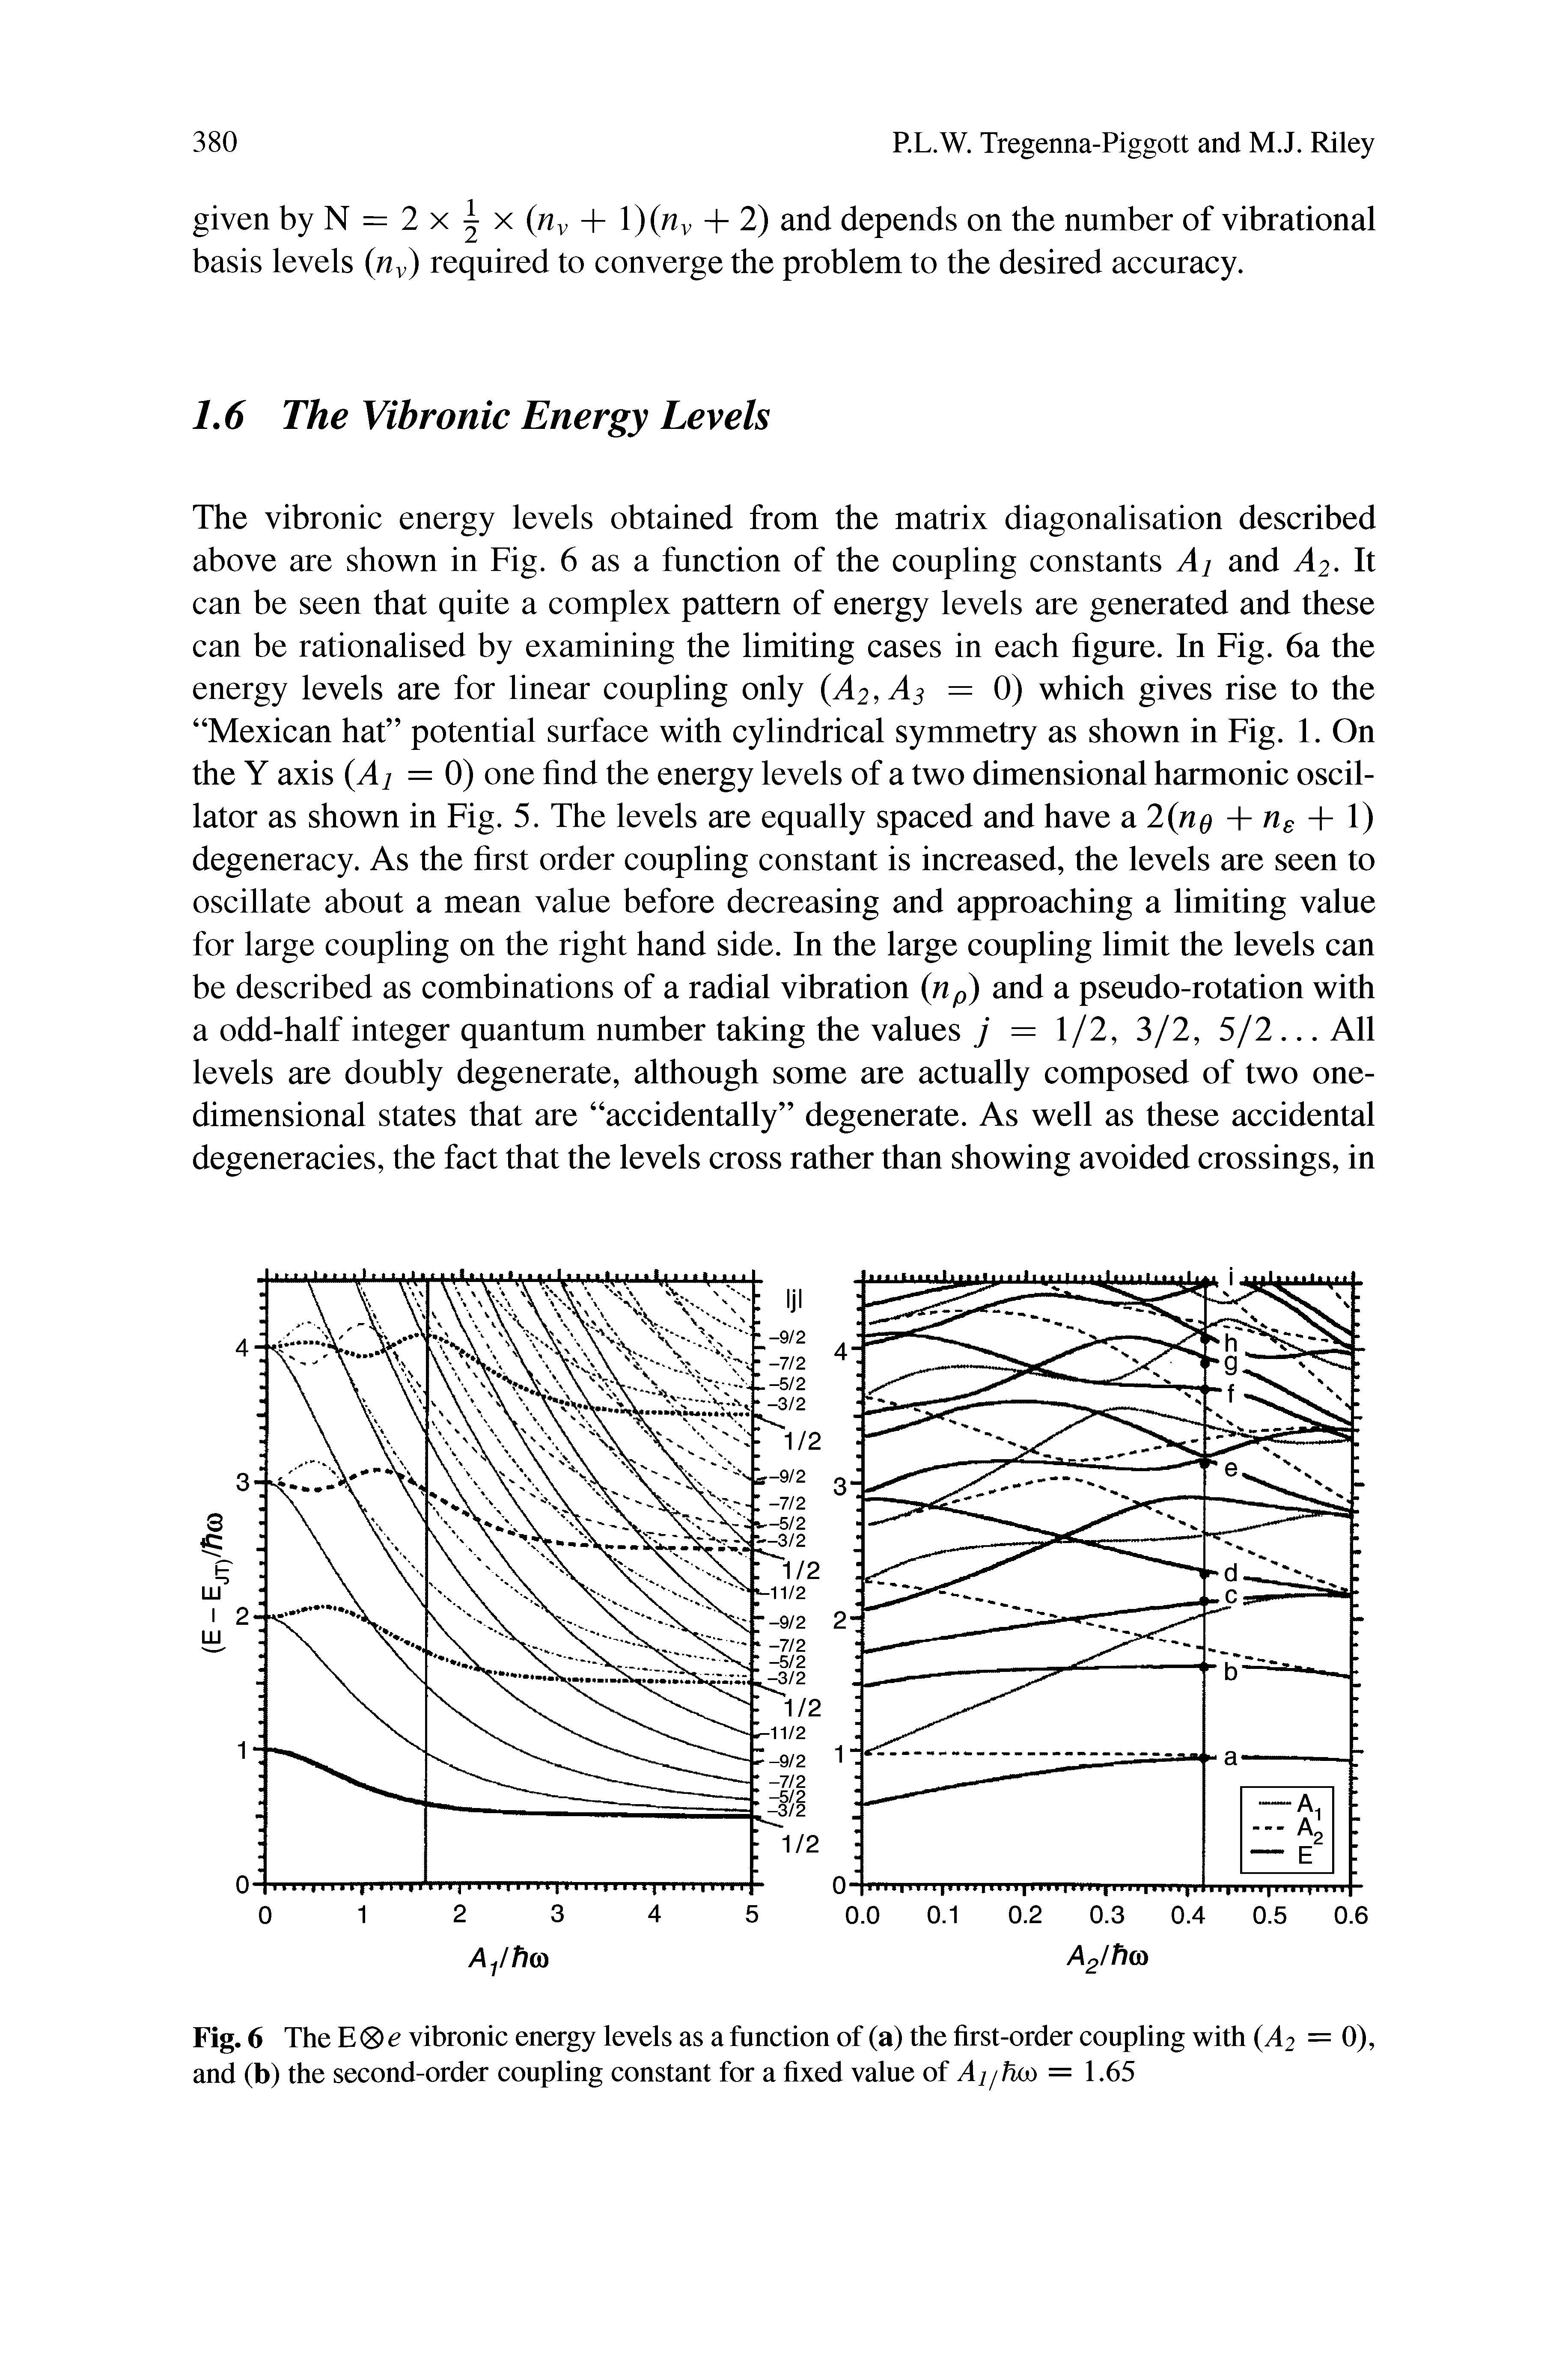 Fig. 6 The vibronic energy levels as a function of (a) the first-order coupling with (A2 = 0), and (b) the second-order coupling constant for a fixed value of Ai/fm = 1.65...